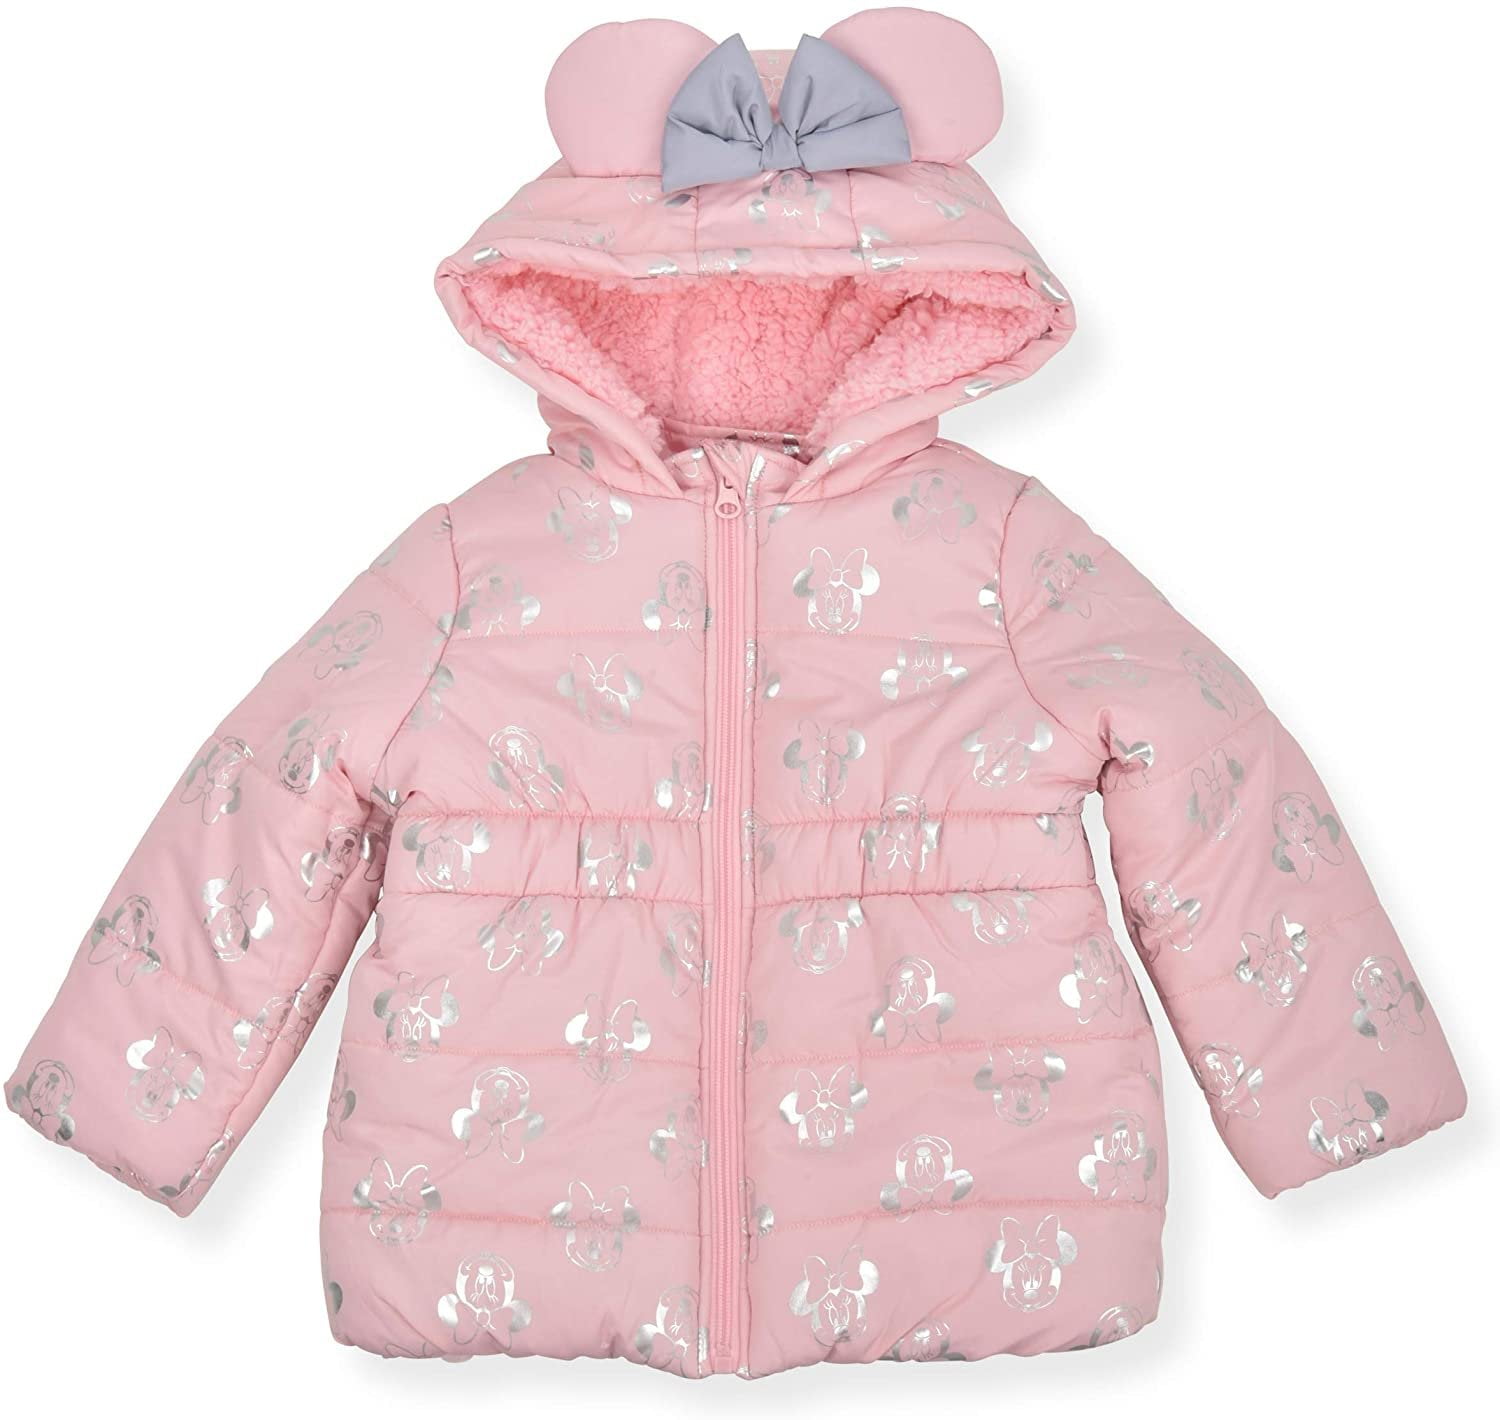 Disney Girls Minnie Mouse Hooded Puffer Pram with Bow and Ears 